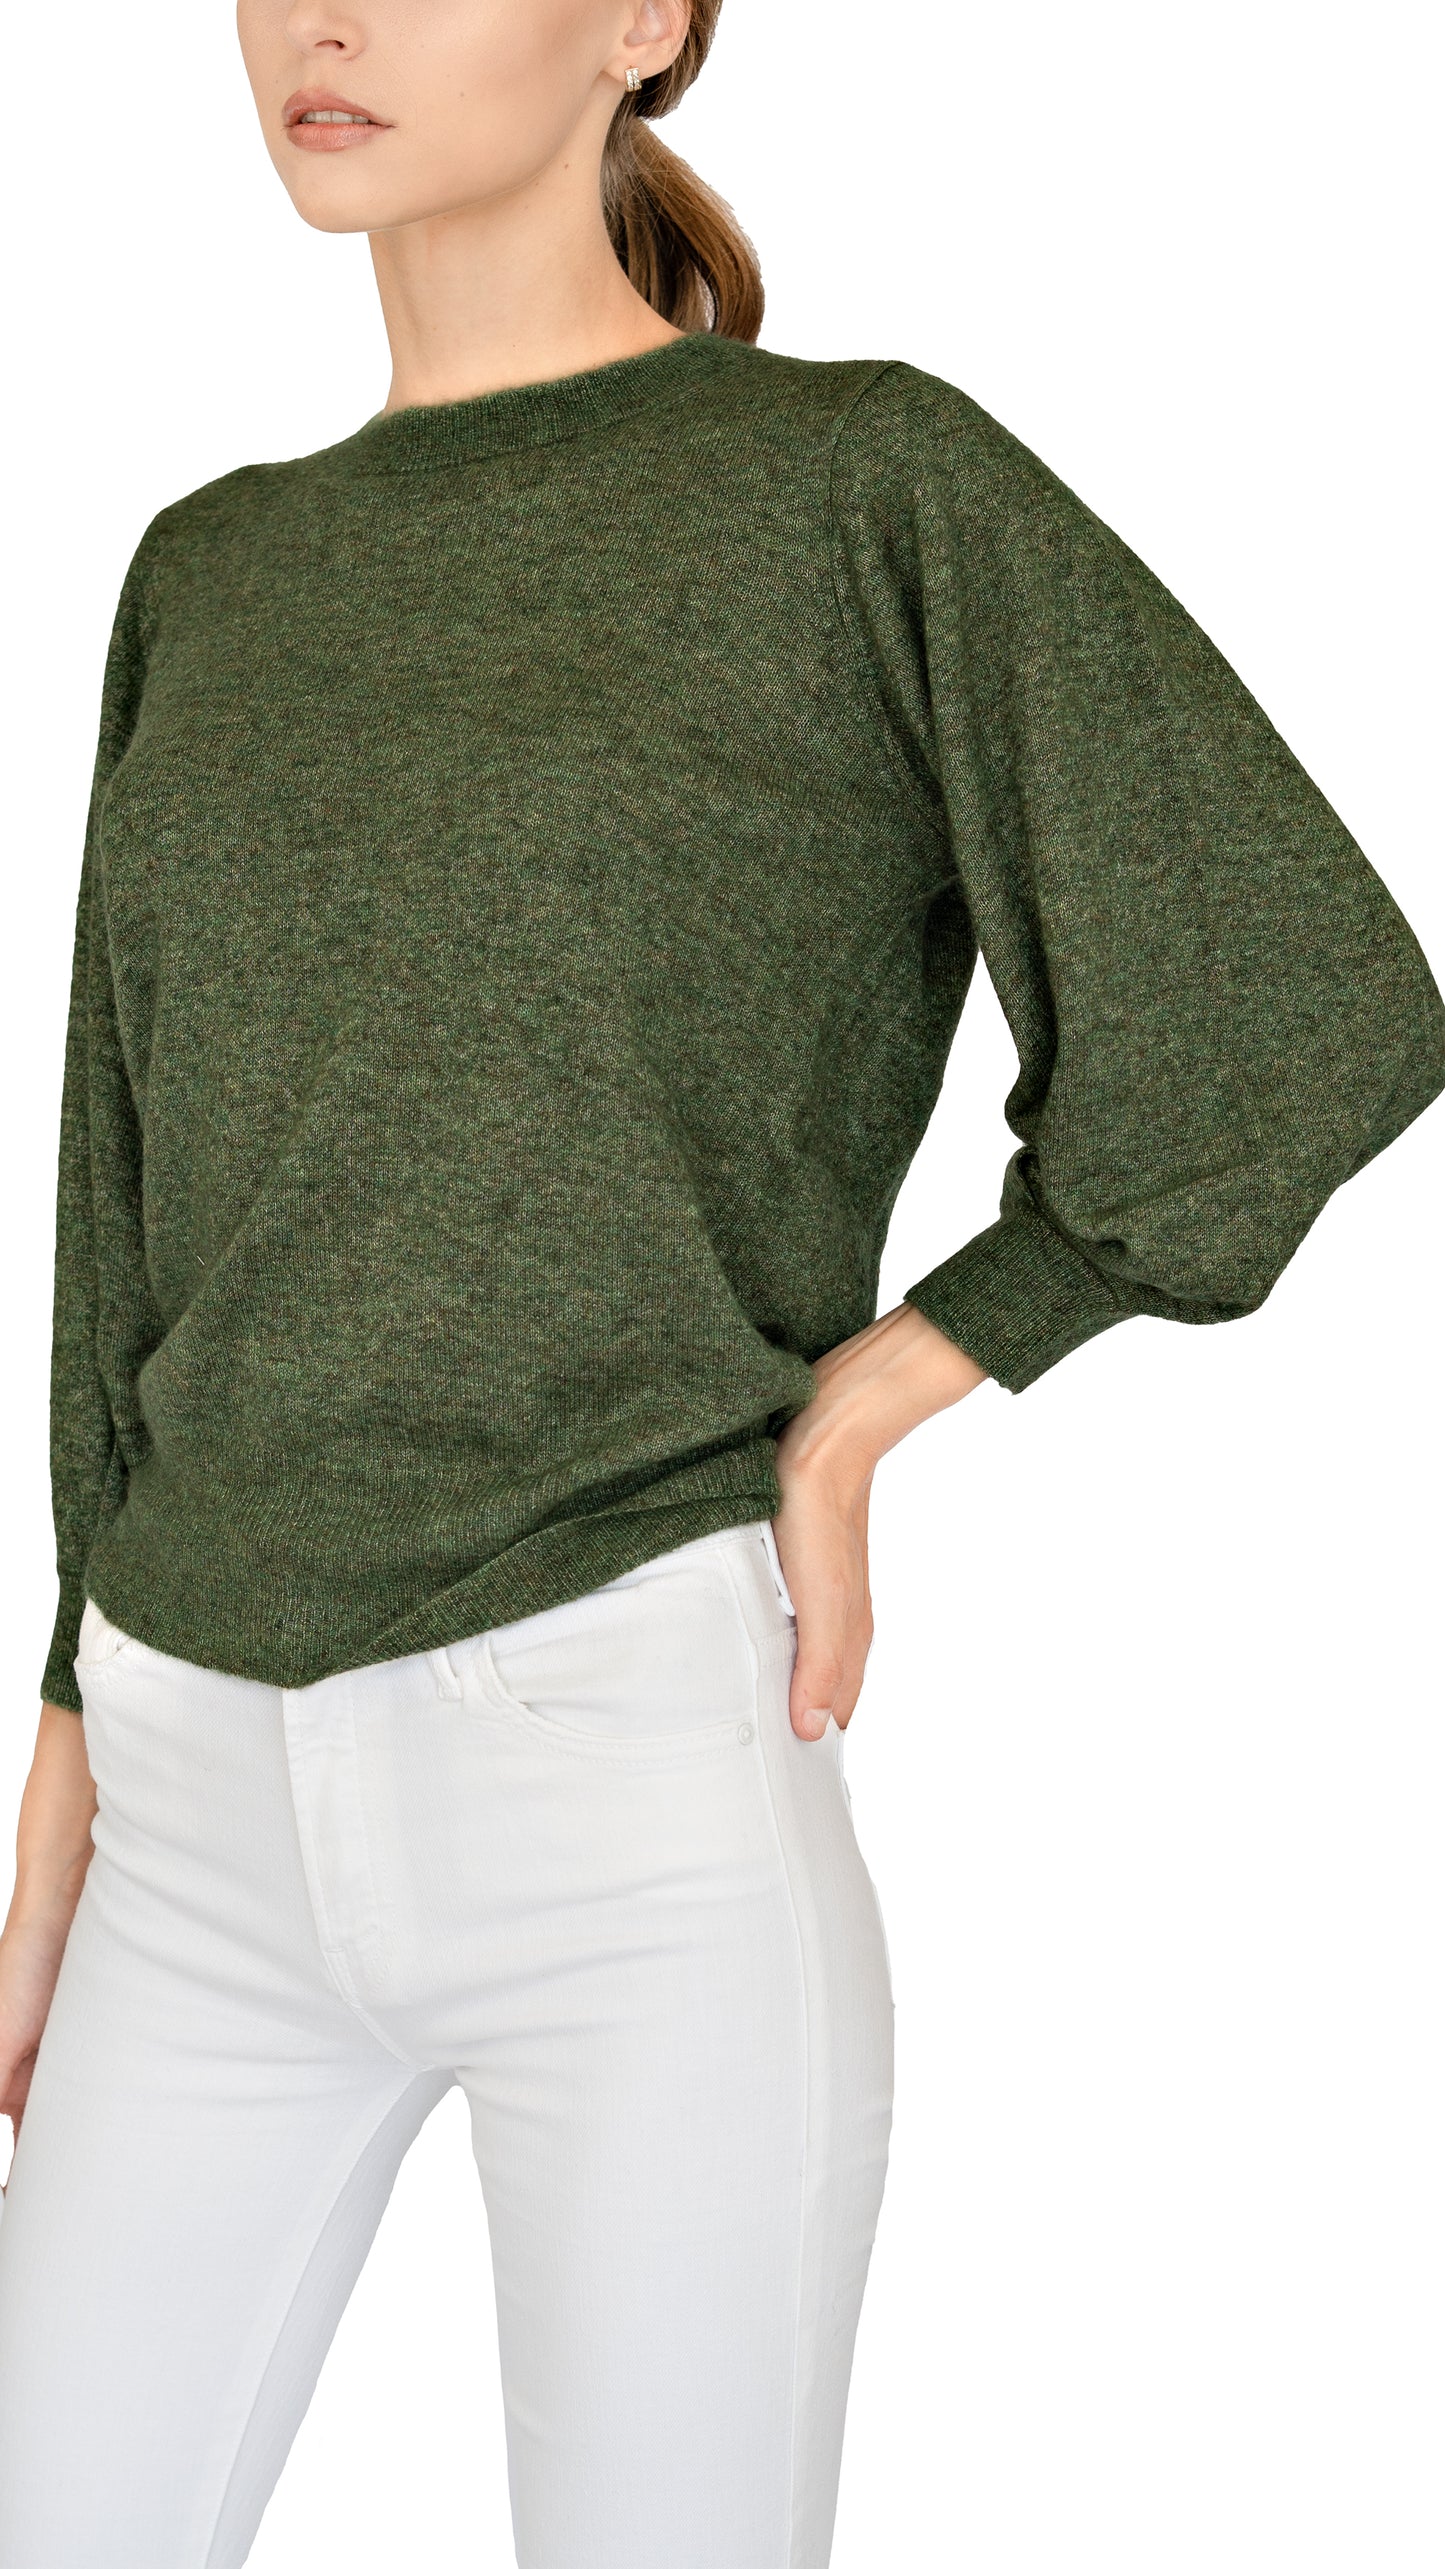 Autumn Cashmere crew neck puff sleeve sweater in green